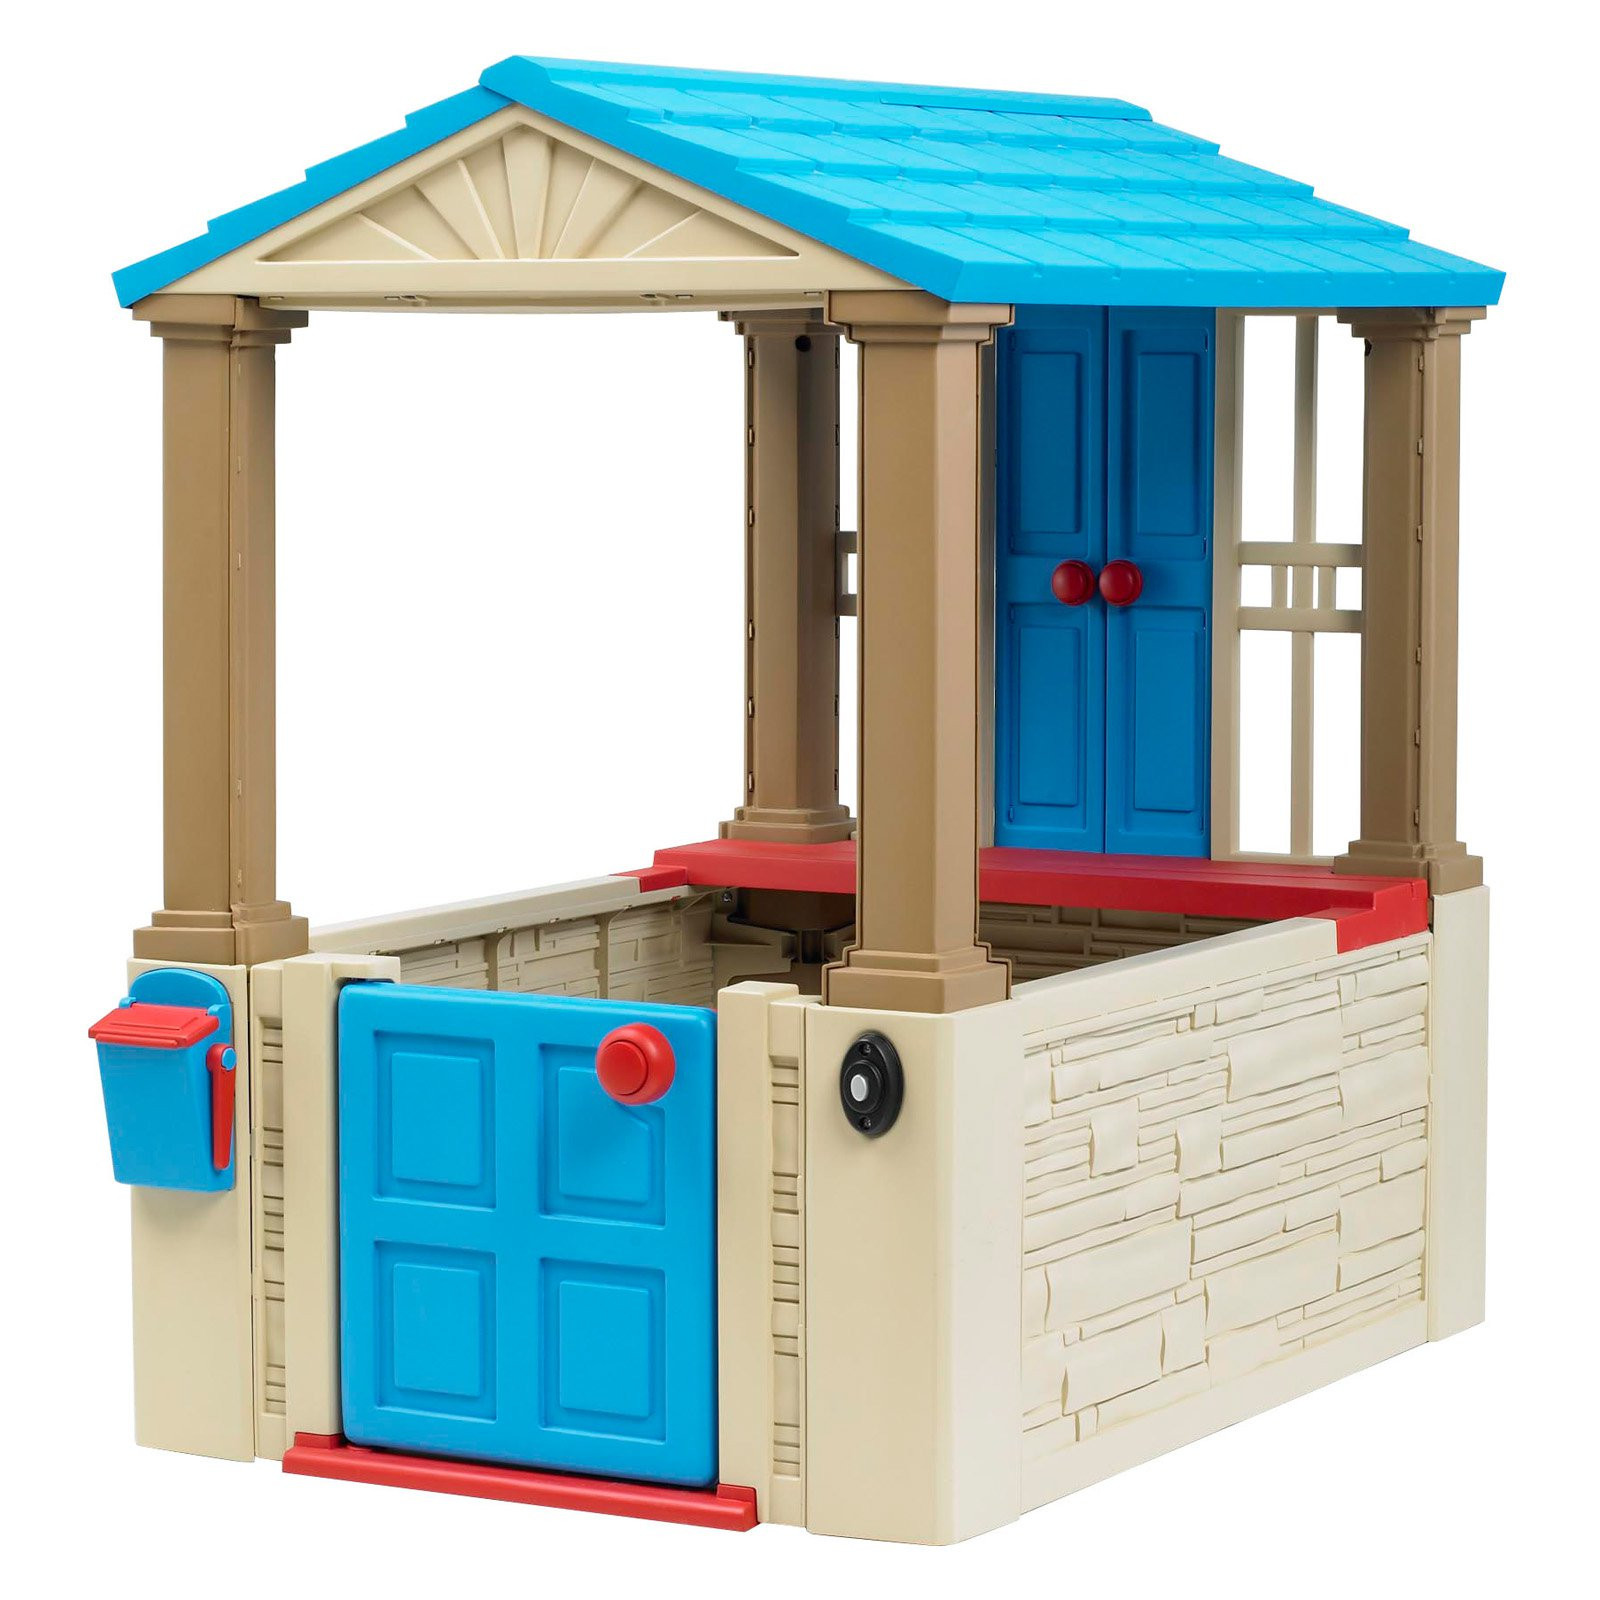 Kids Outdoor Plastic Playhouse
 American Plastic Toys My First Playhouse Indoor